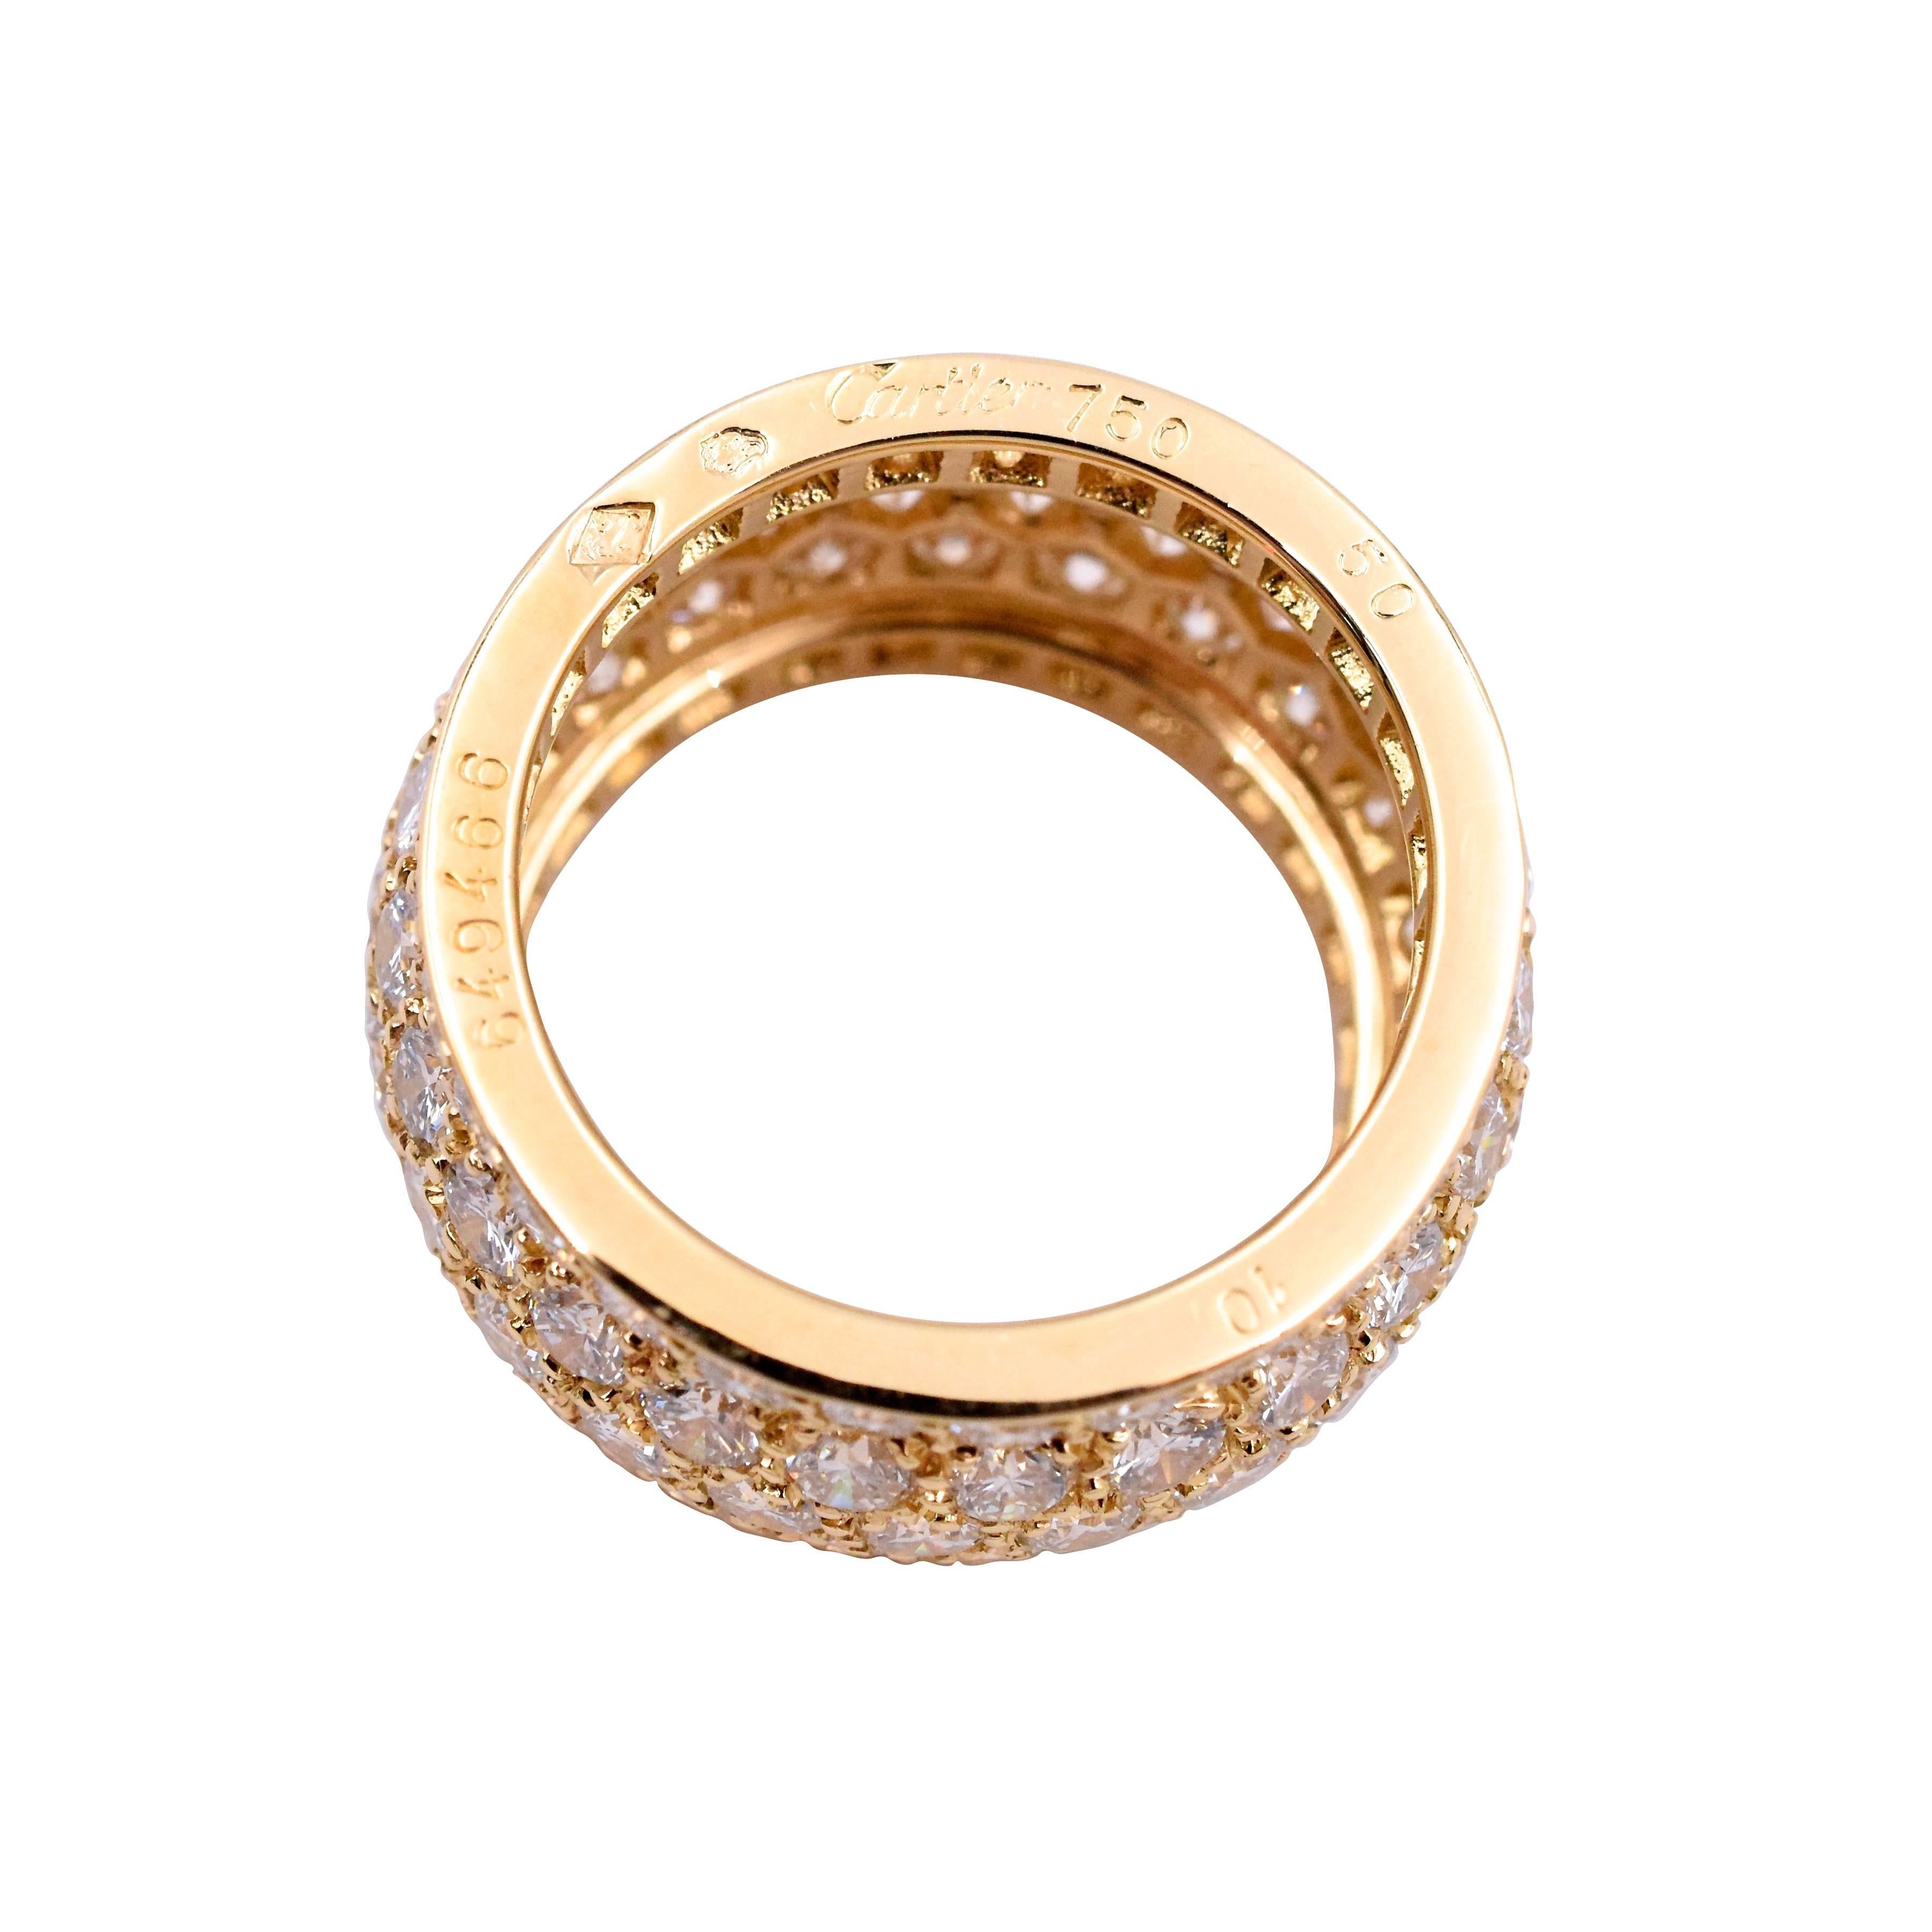 A gold and diamond eternity ring by Cartier, from the 